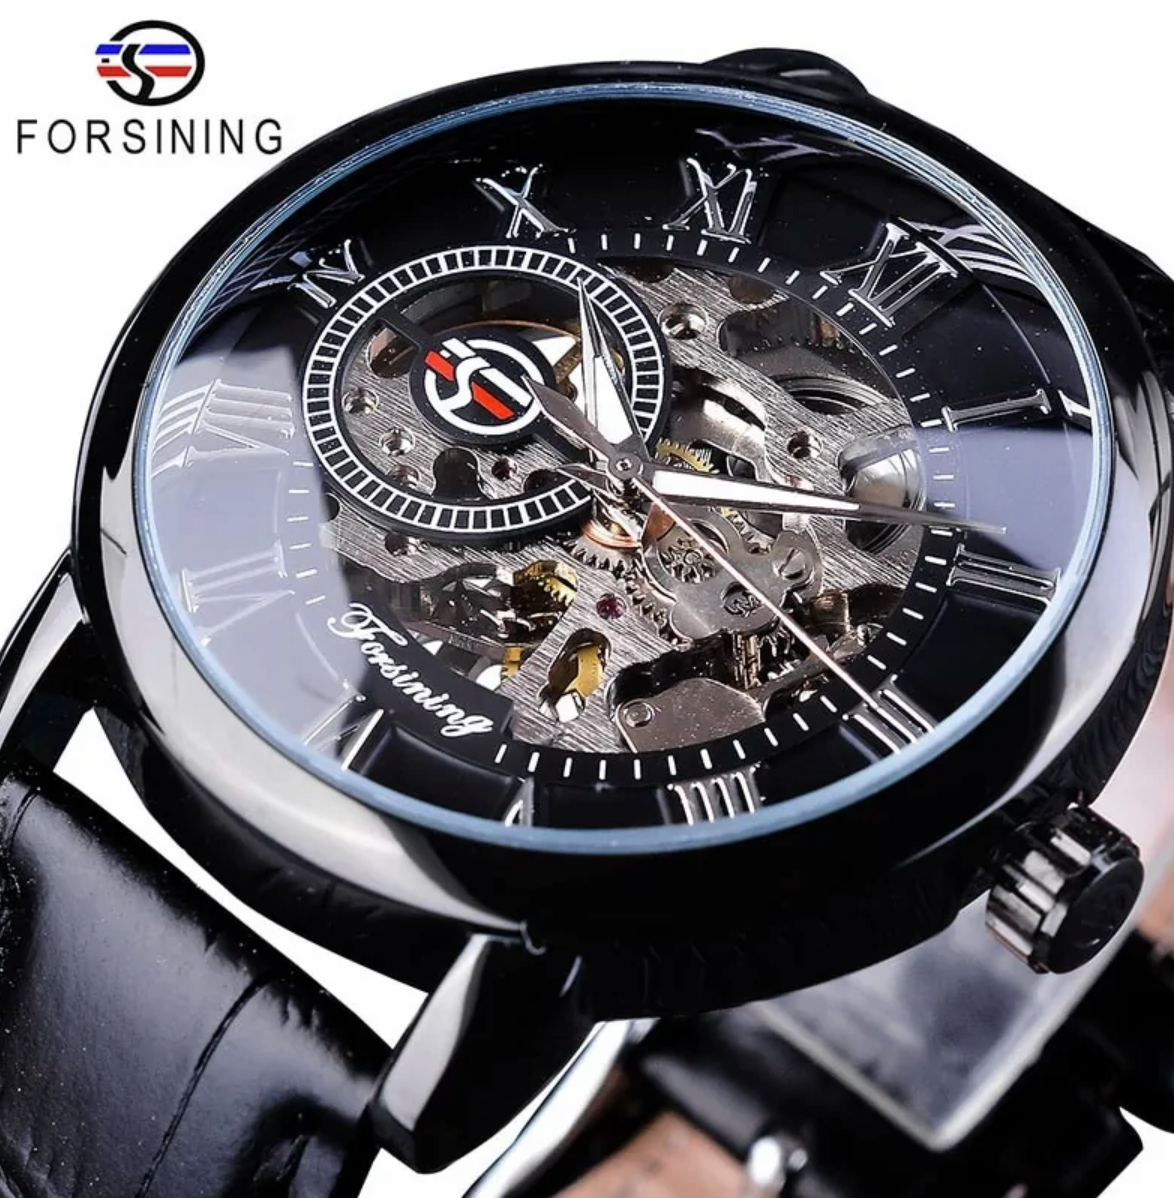 A Men Luxury Brand Watch, Stunning Skeleton Dial Design by Maramalive™ with black leather strap.